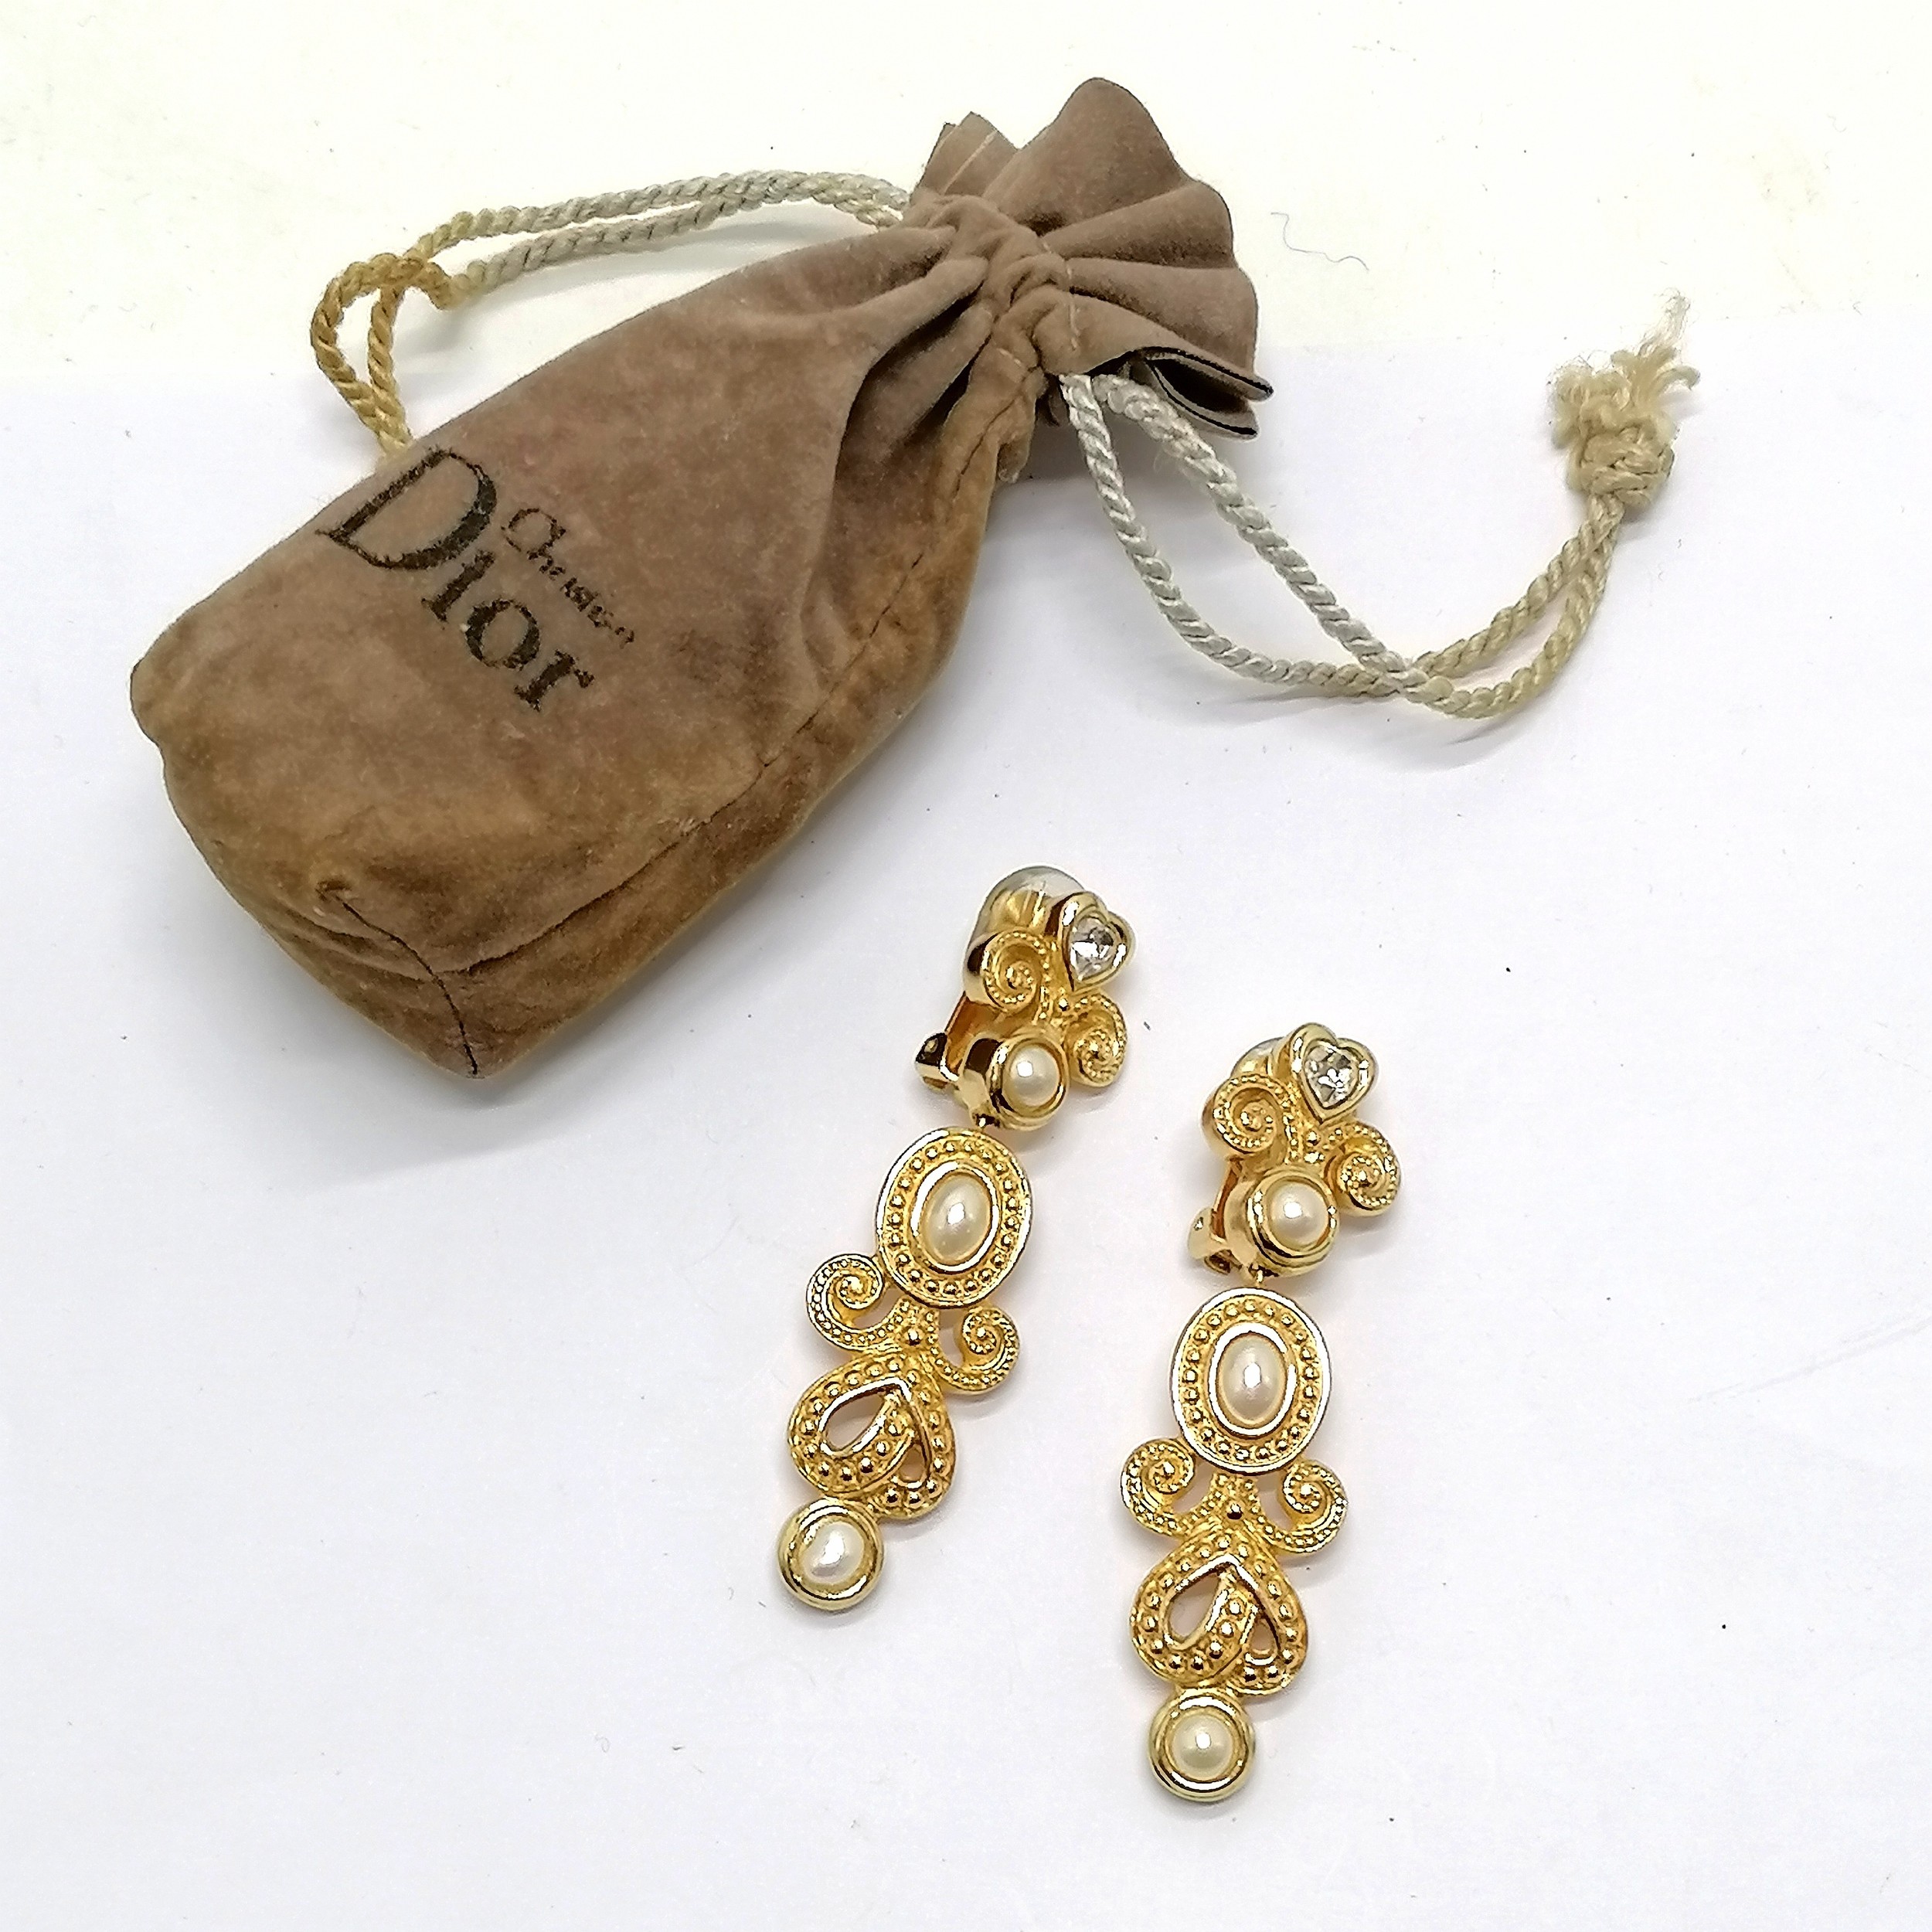 Christian Dior pair of pendant drop earrings (7cm) in original pouch